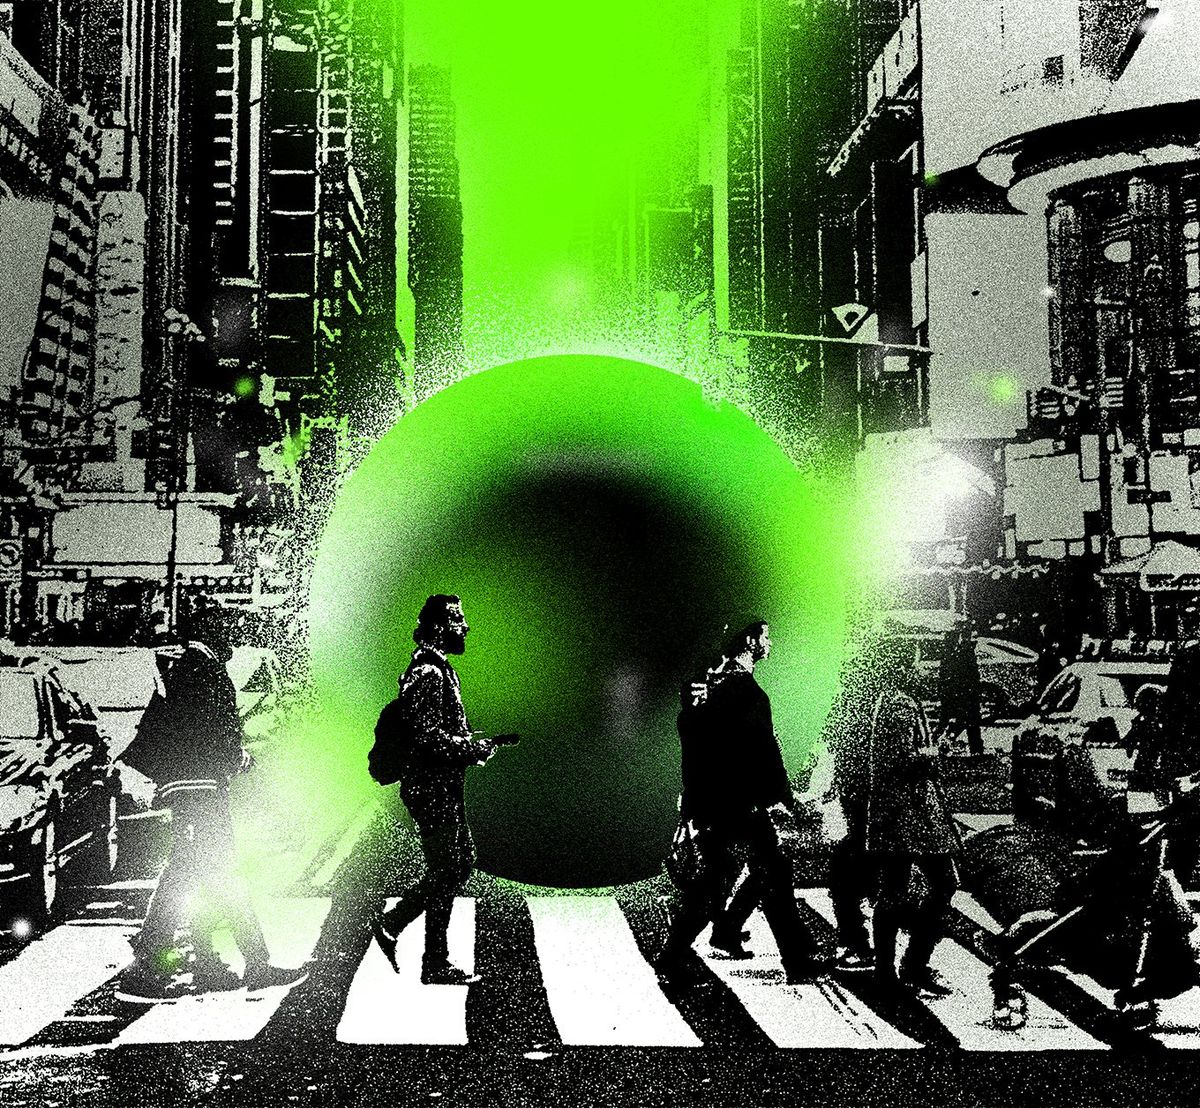 An illustration of people walking in a city with a large green globe behind them.  